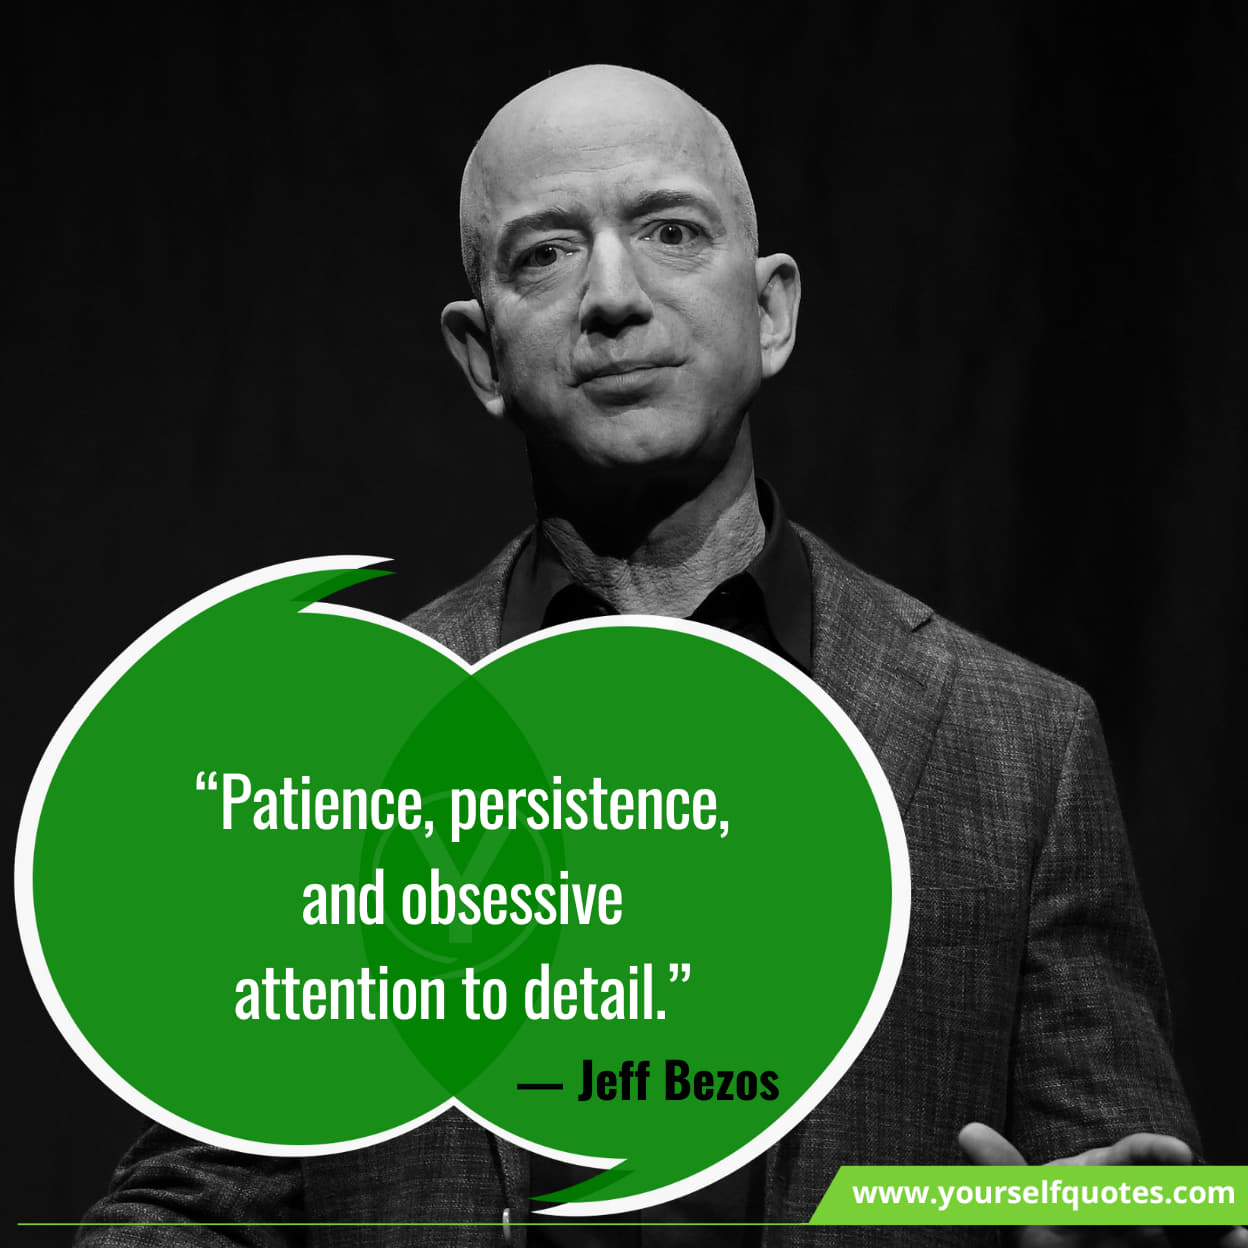 Best Quotes From Jeff Bezos